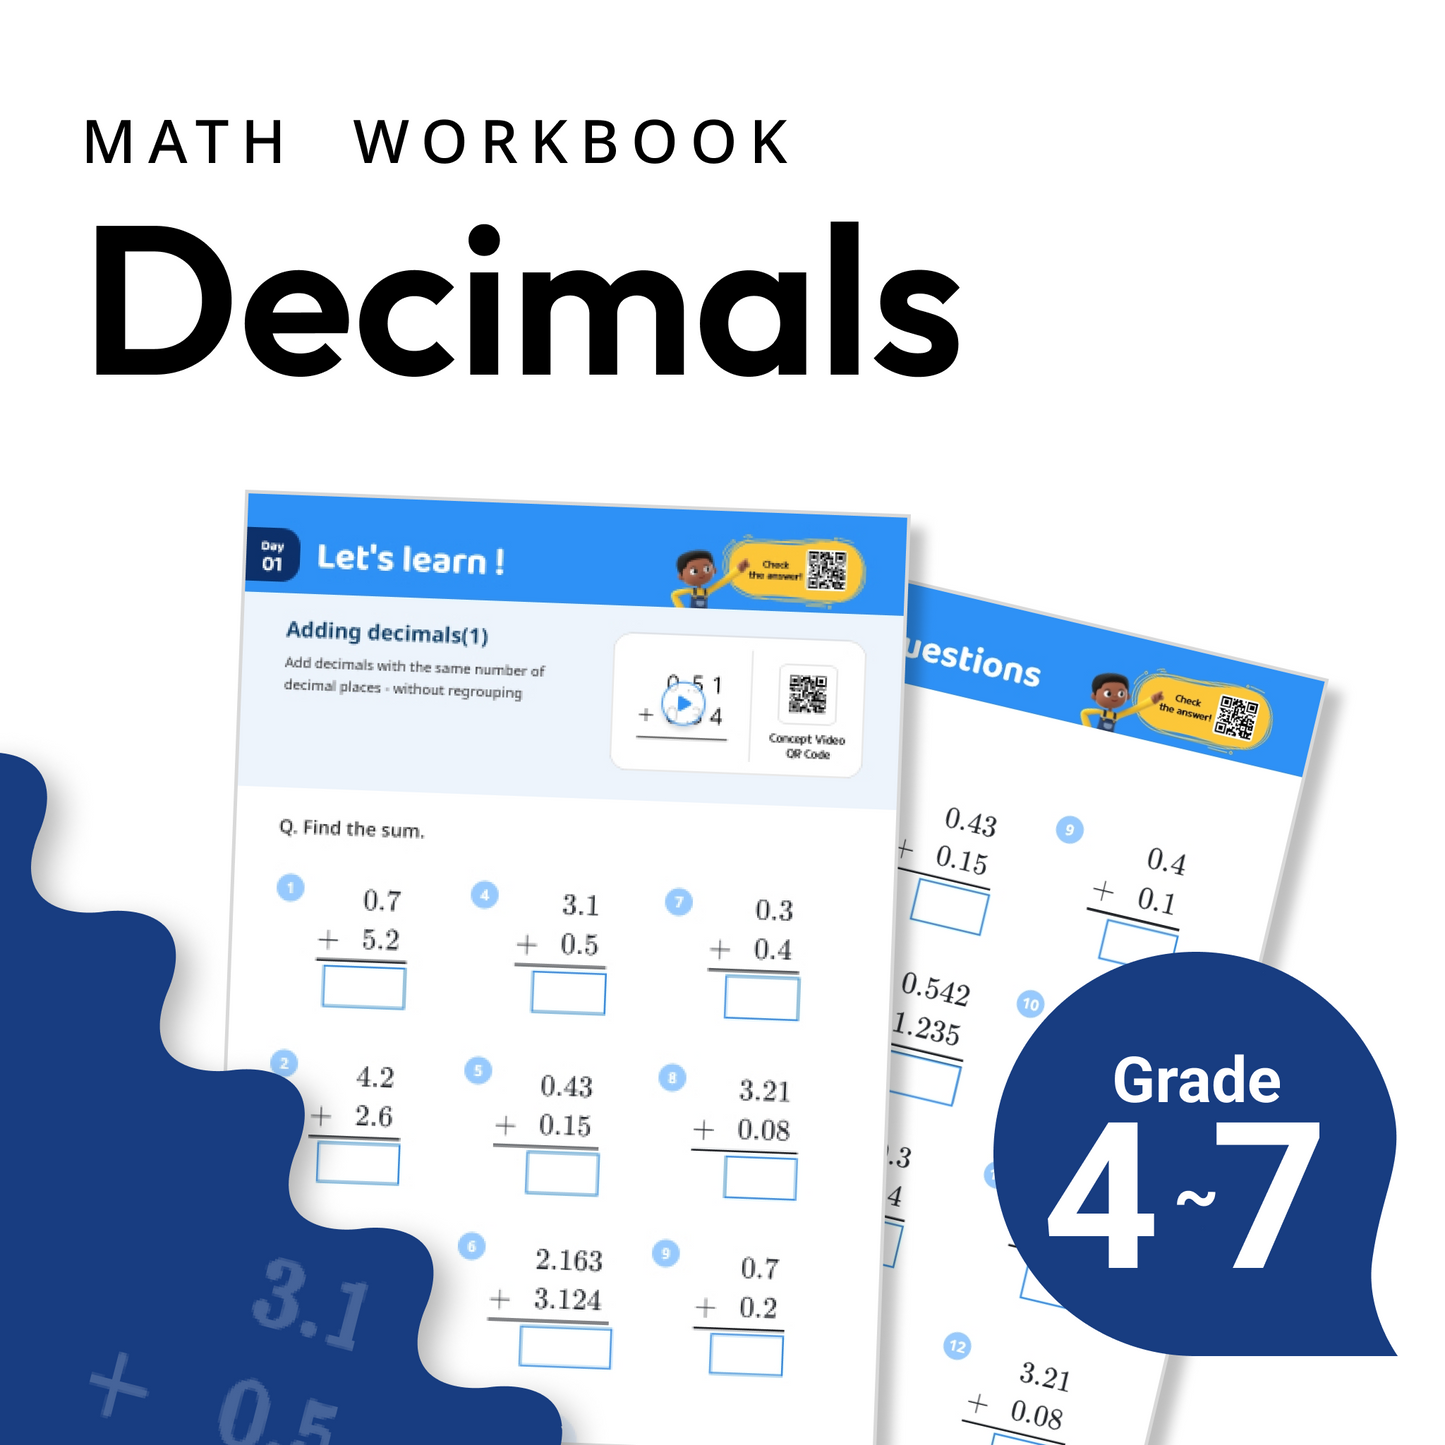 Multiply_fractions_and_decimals